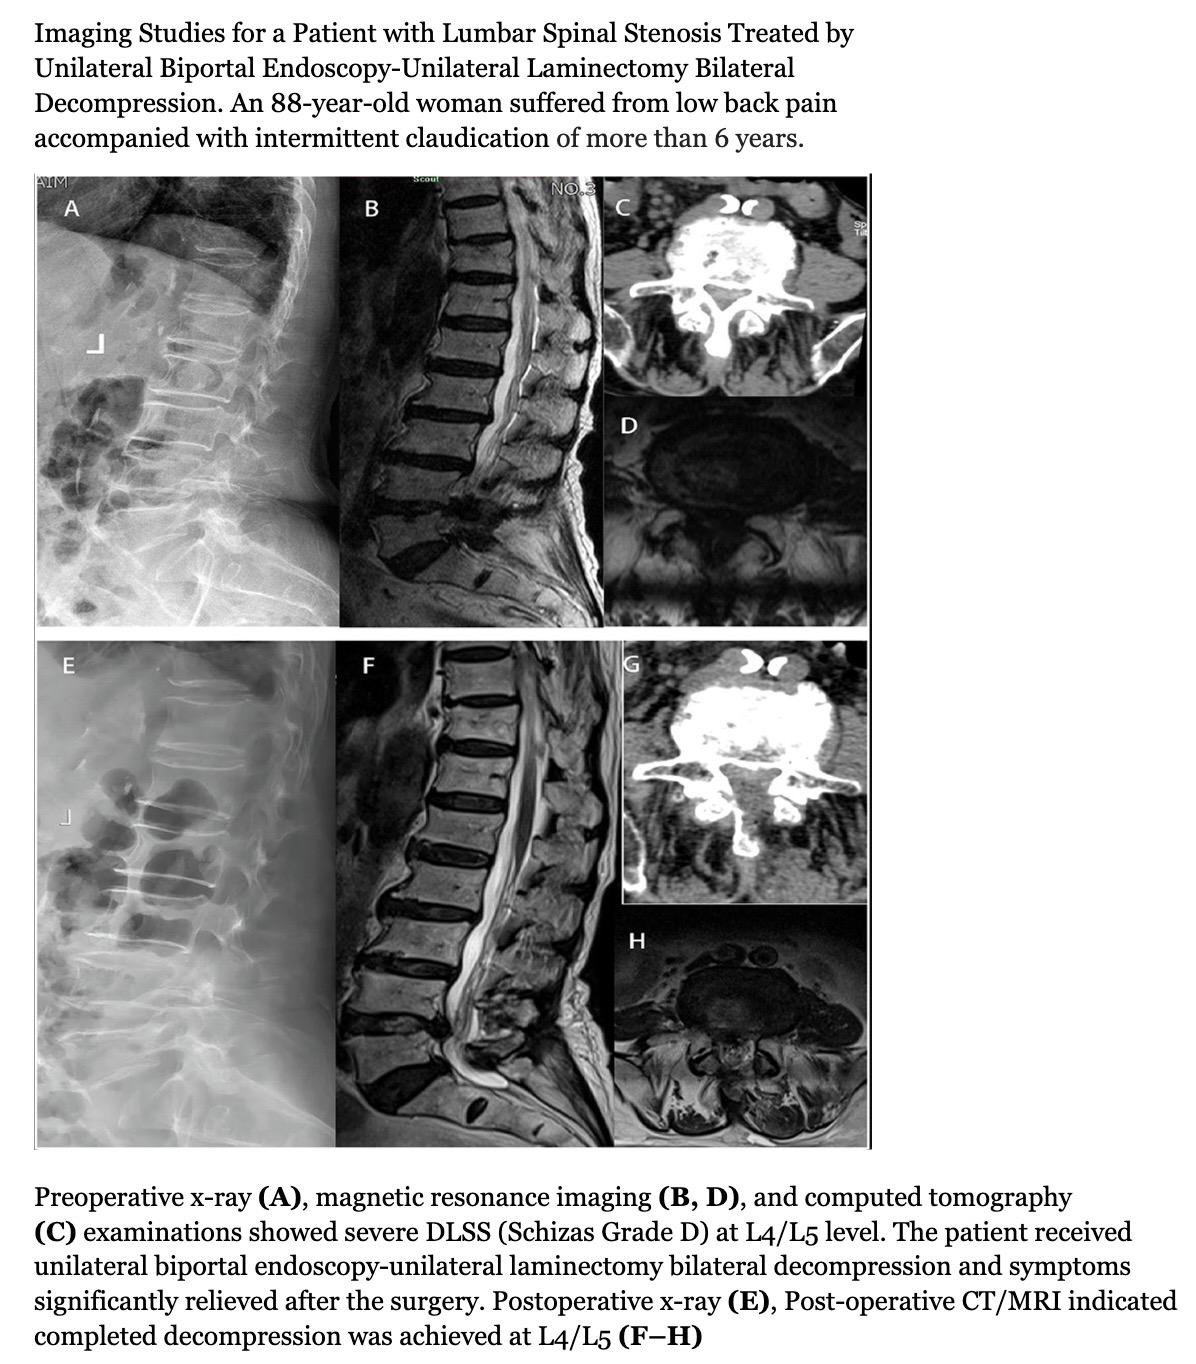 <p>Imaging Studies for a Patient with Lumbar Spinal Stenosis Treated by Unilateral Biportal Endoscopy-Unilateral Laminectomy Bilateral Decompression